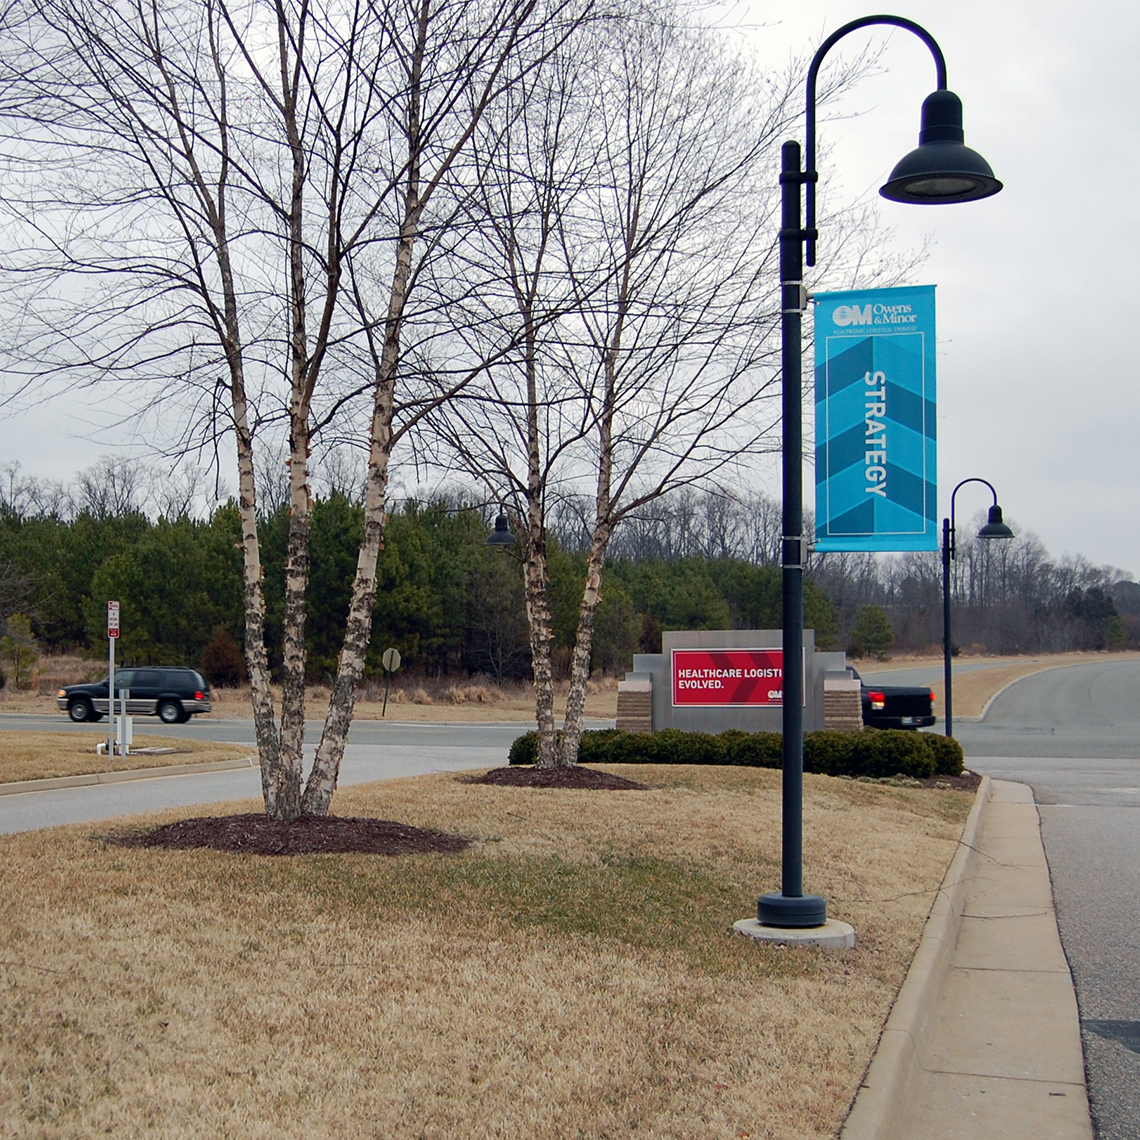 Business driveway banners